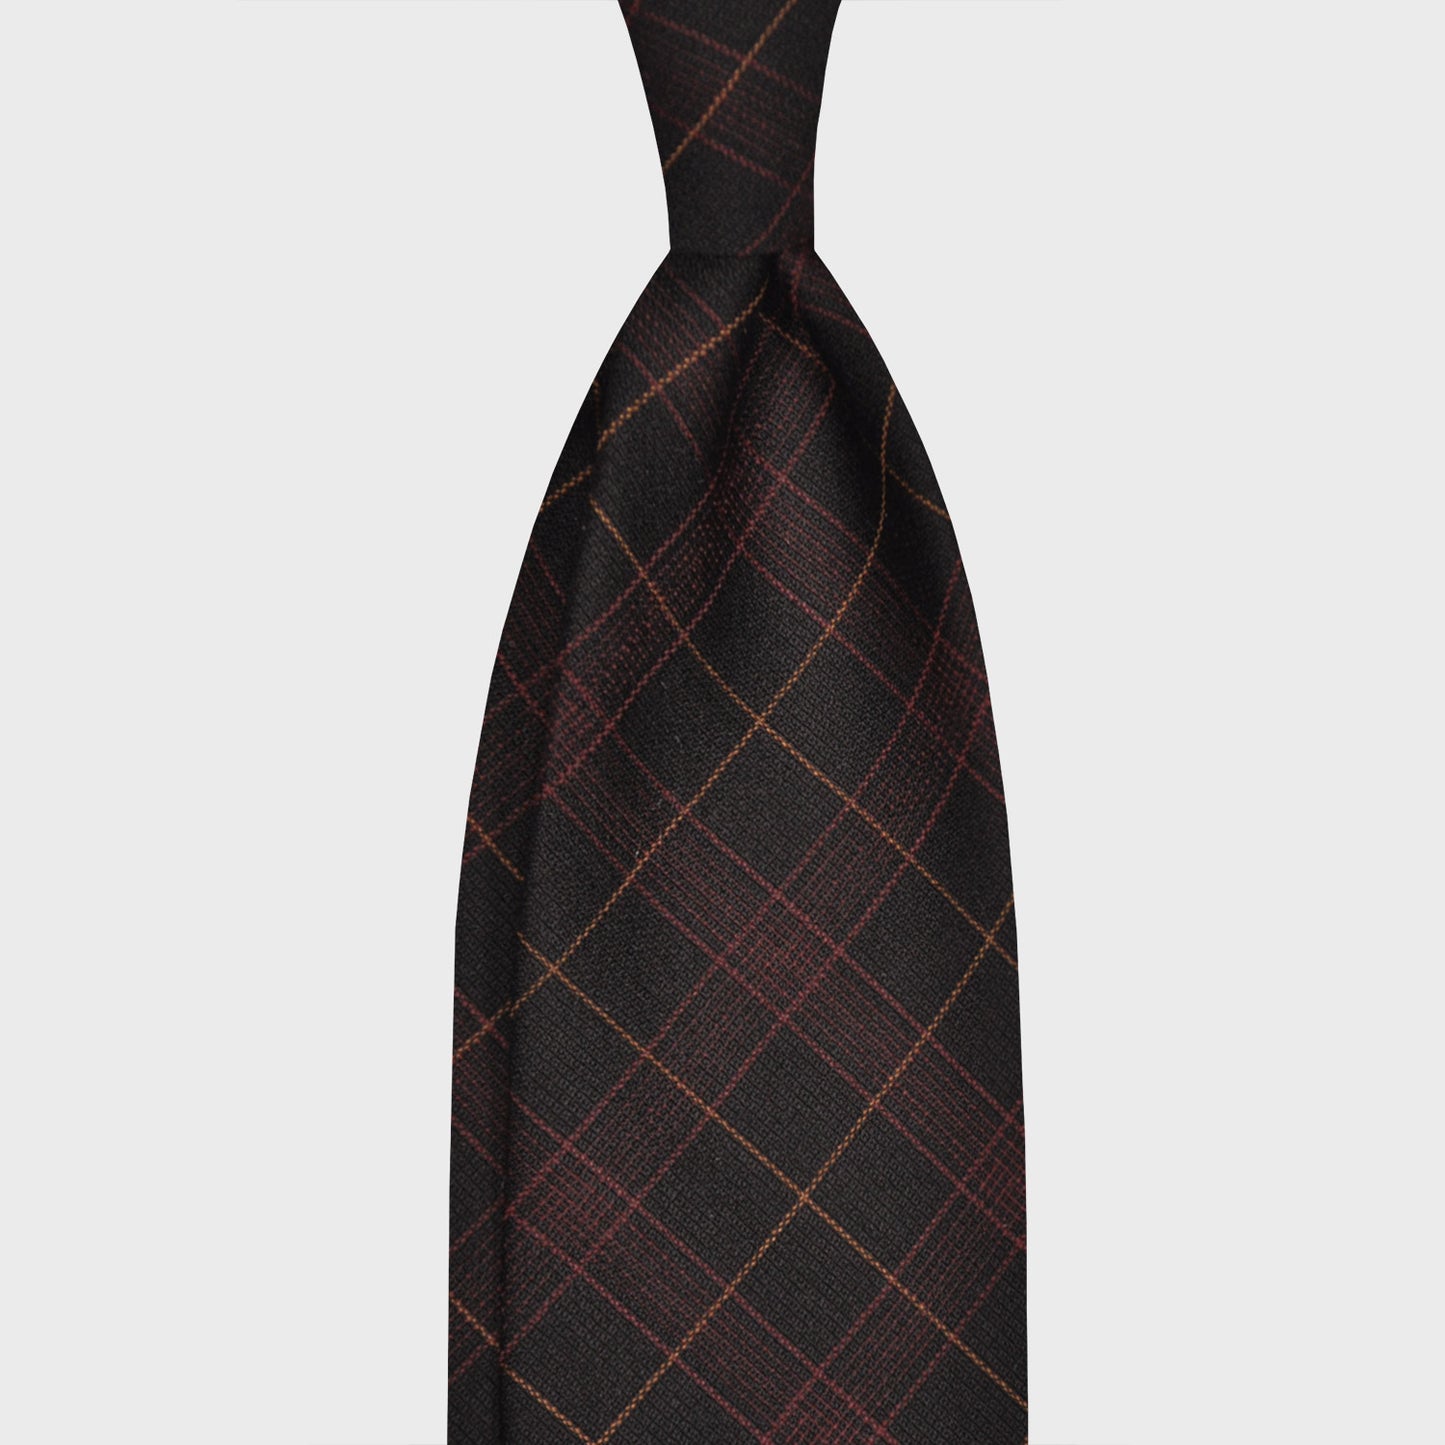 F.Marino Checked Wool Tie 3 Folds Gold-Wools Boutique Uomo